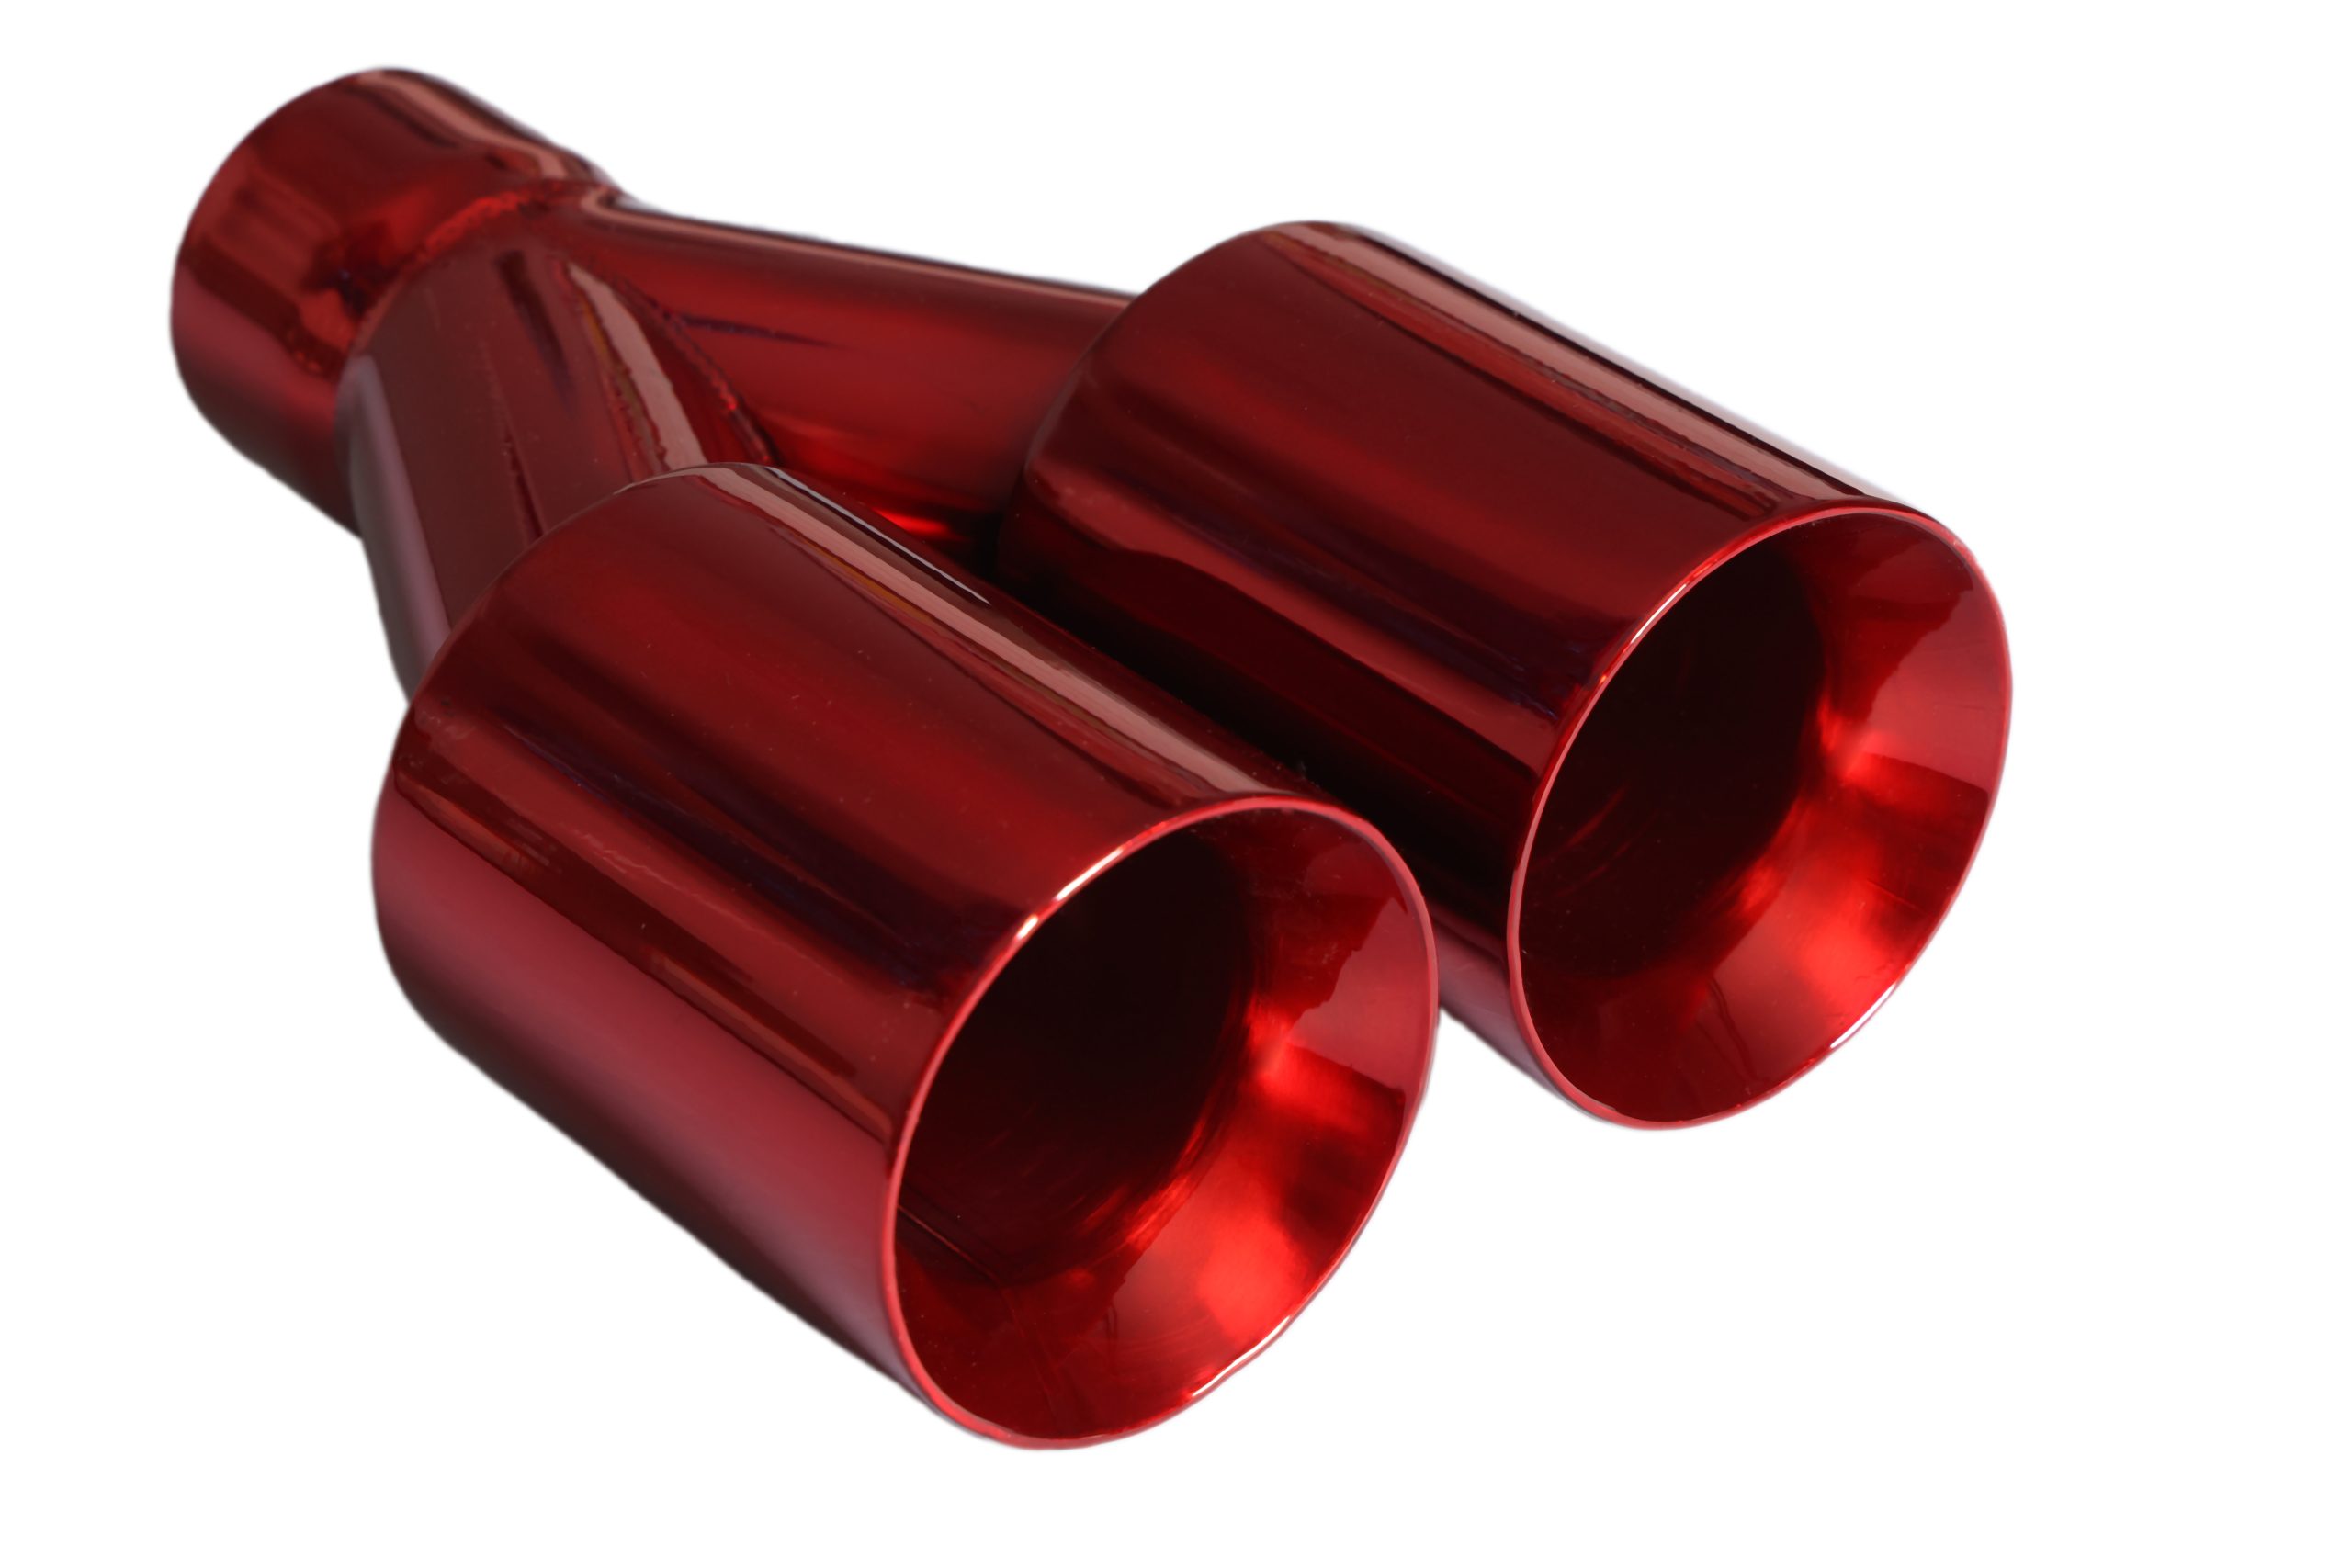 powder coated Red Exhaust Tip 025-1